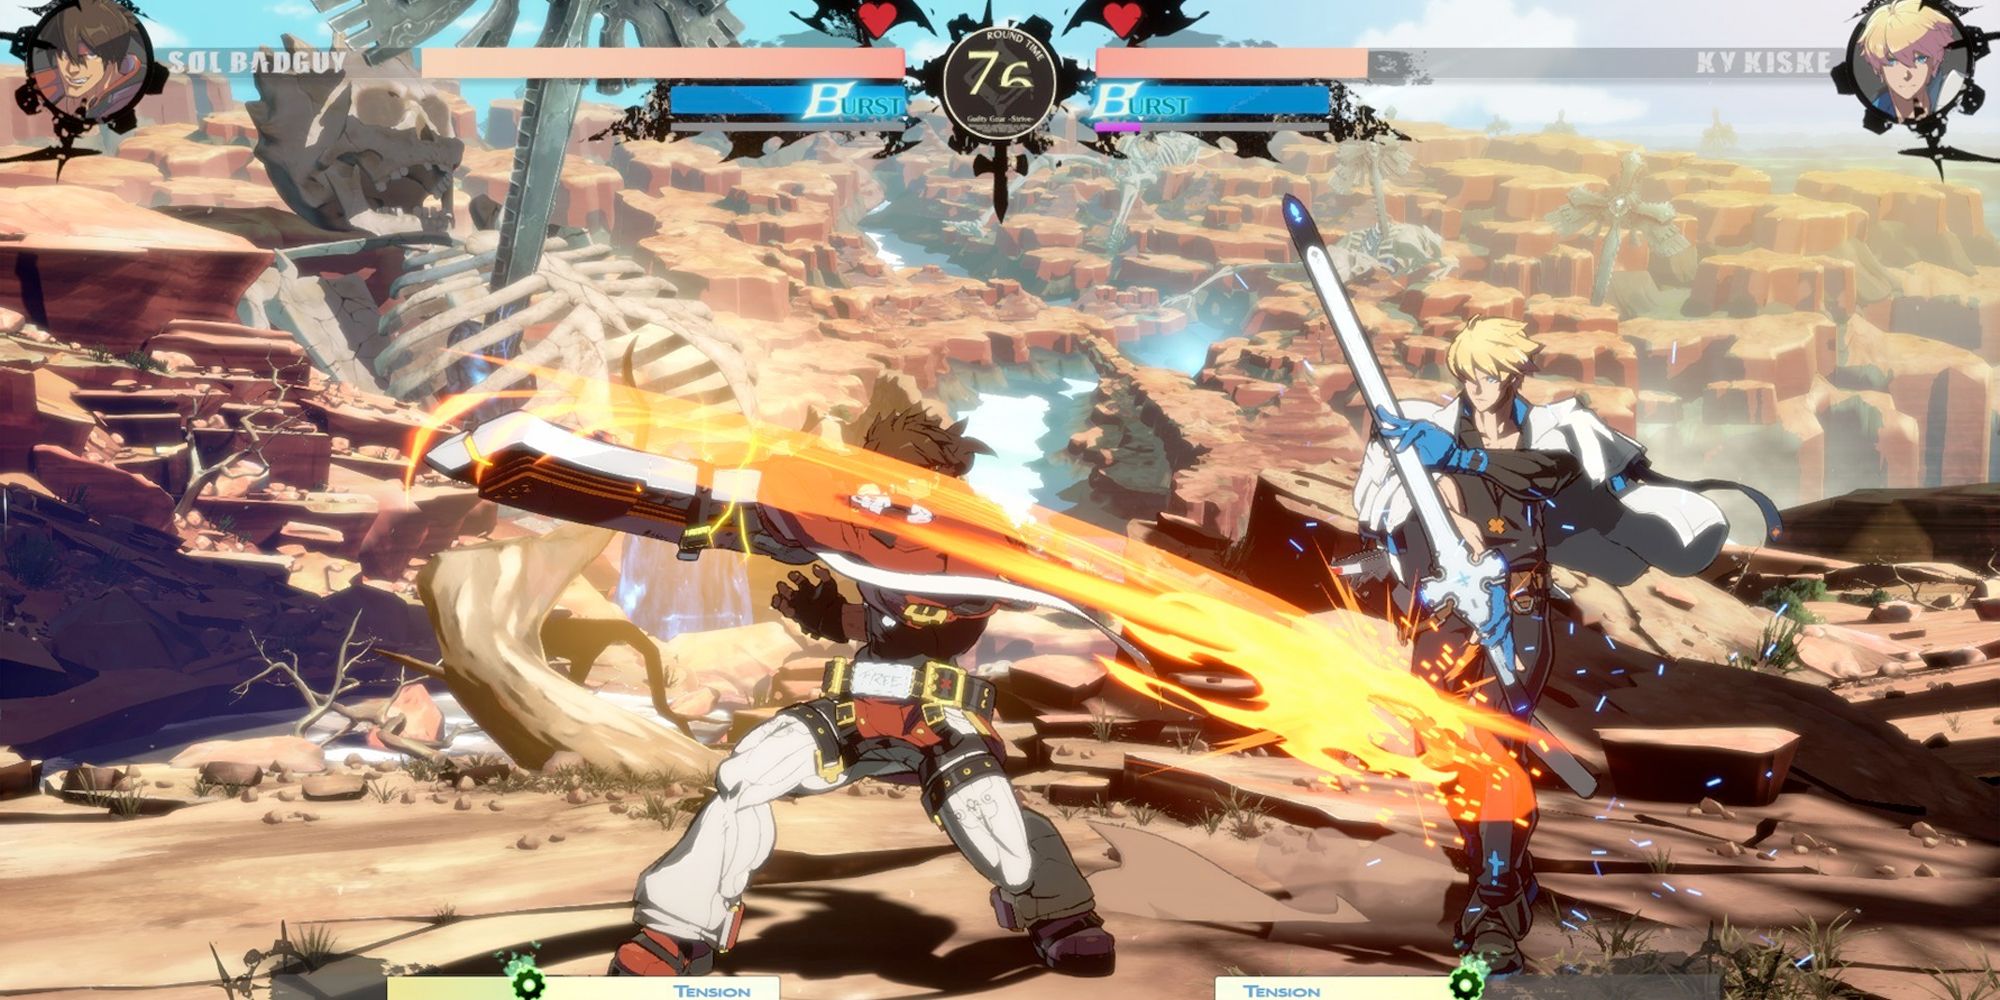 Sol attacks his rival, Ky, with a forward slash in Guilty Gear Strive